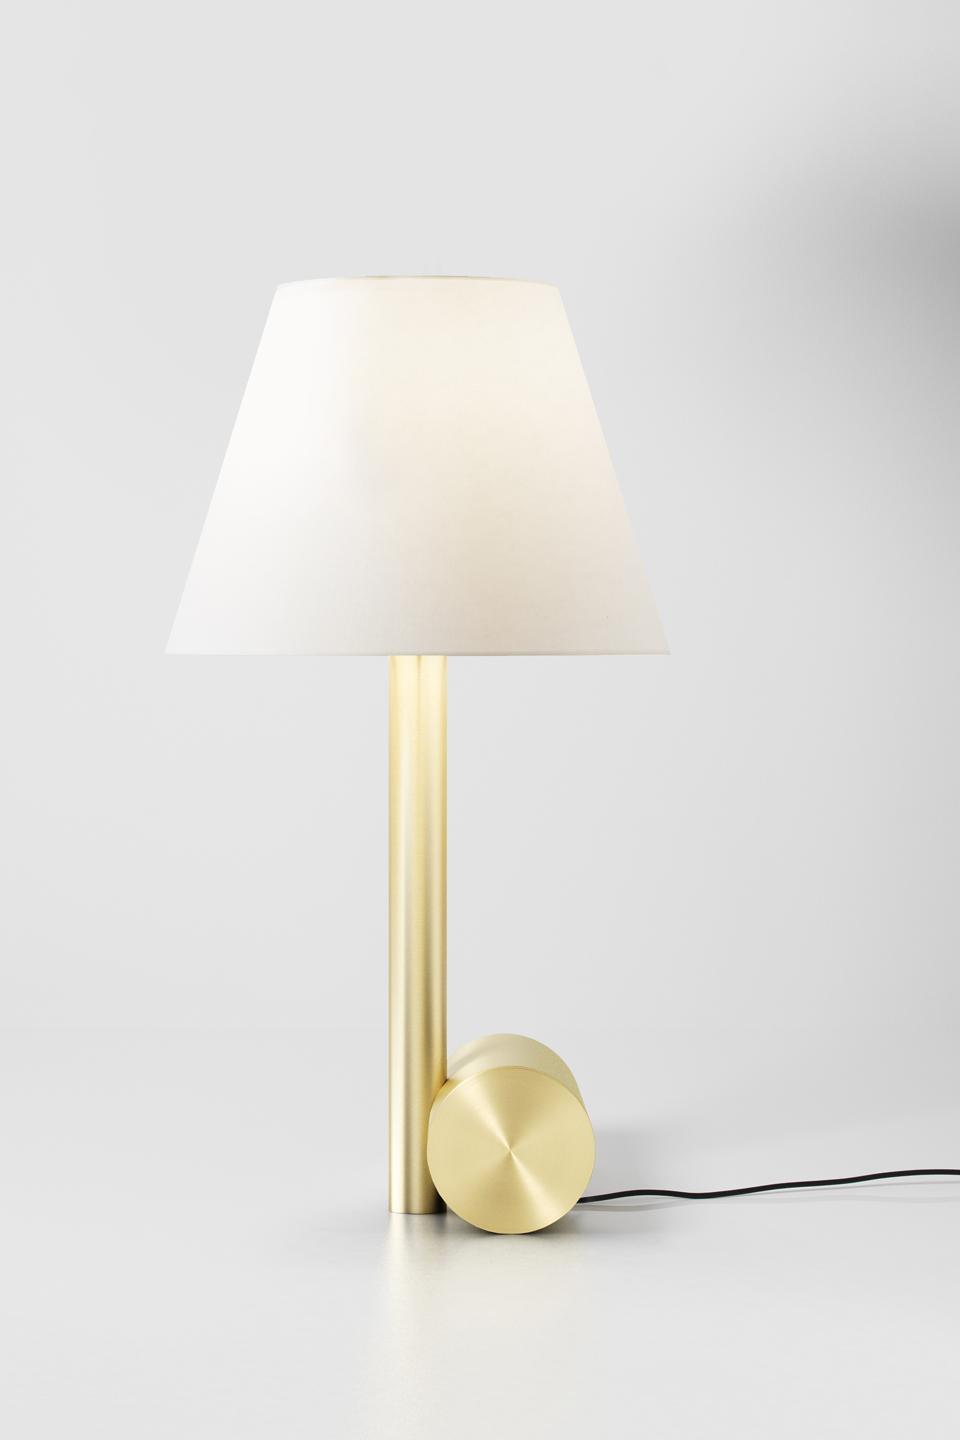 Small Table Lamp Cale E Satin Brass And White Lampshade Cvl